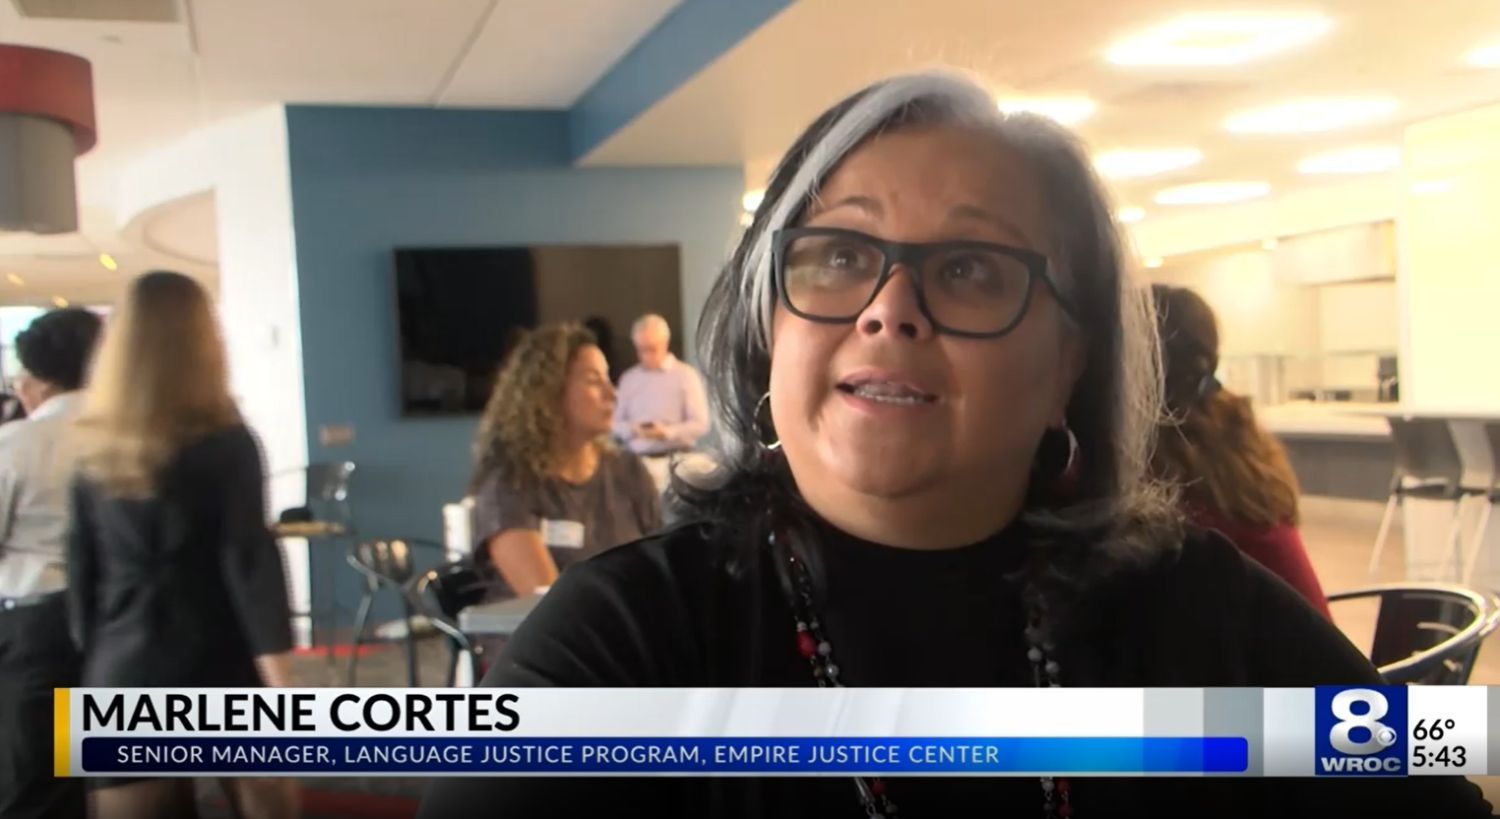 Marlene Cortes being interviewed by WROC Rochester. She is a Latina woman with a cool grey streak in her hair and glasses.